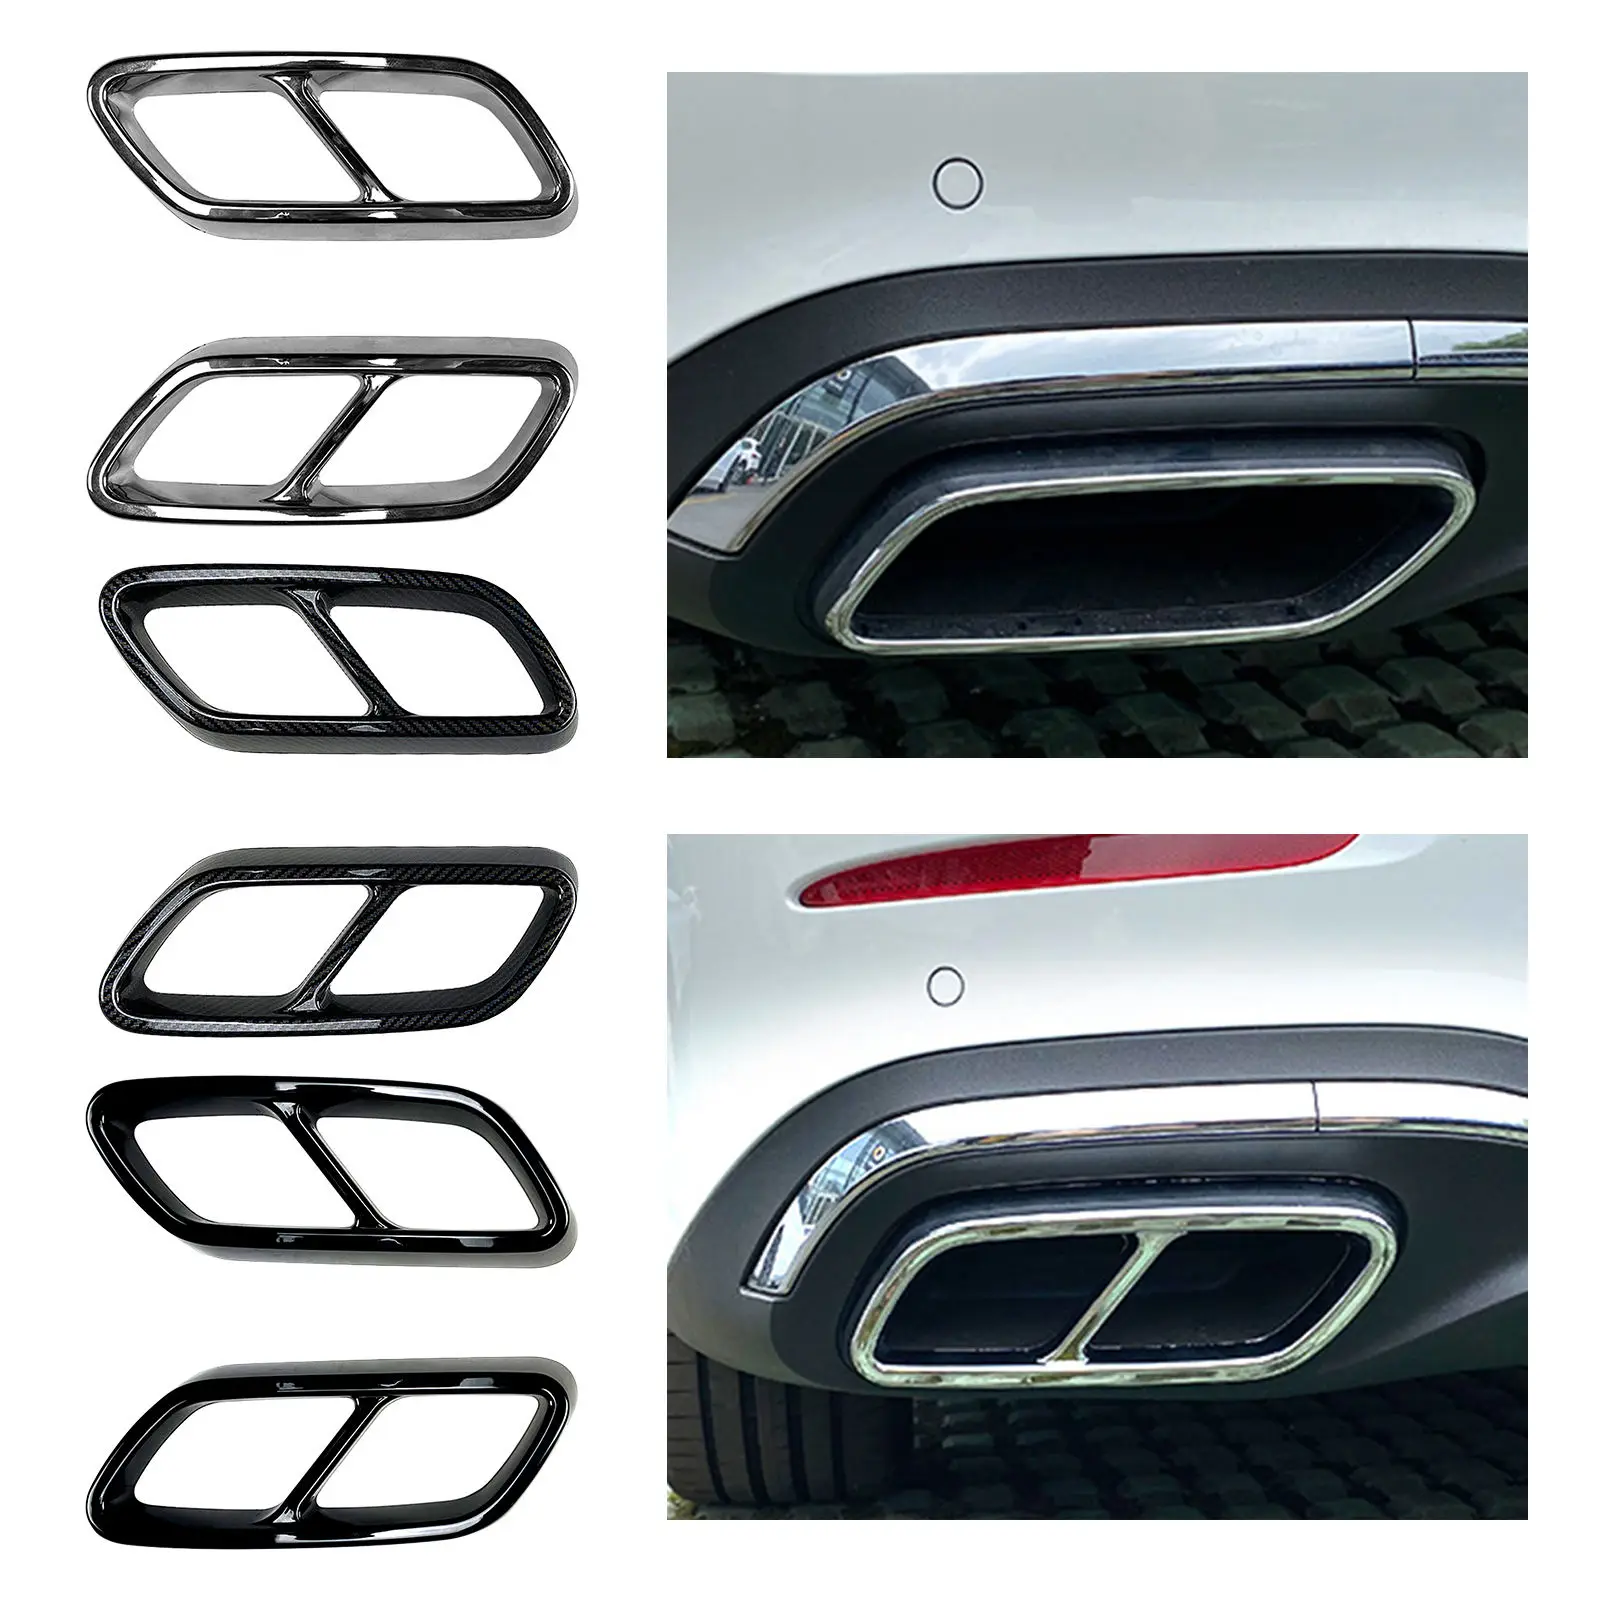 2x Exhaust Pipe Cover Trim Muffler Exterior Decoration Decorate Durable Sticks Covers Fits for Mercedes x253 2015-2018 W205